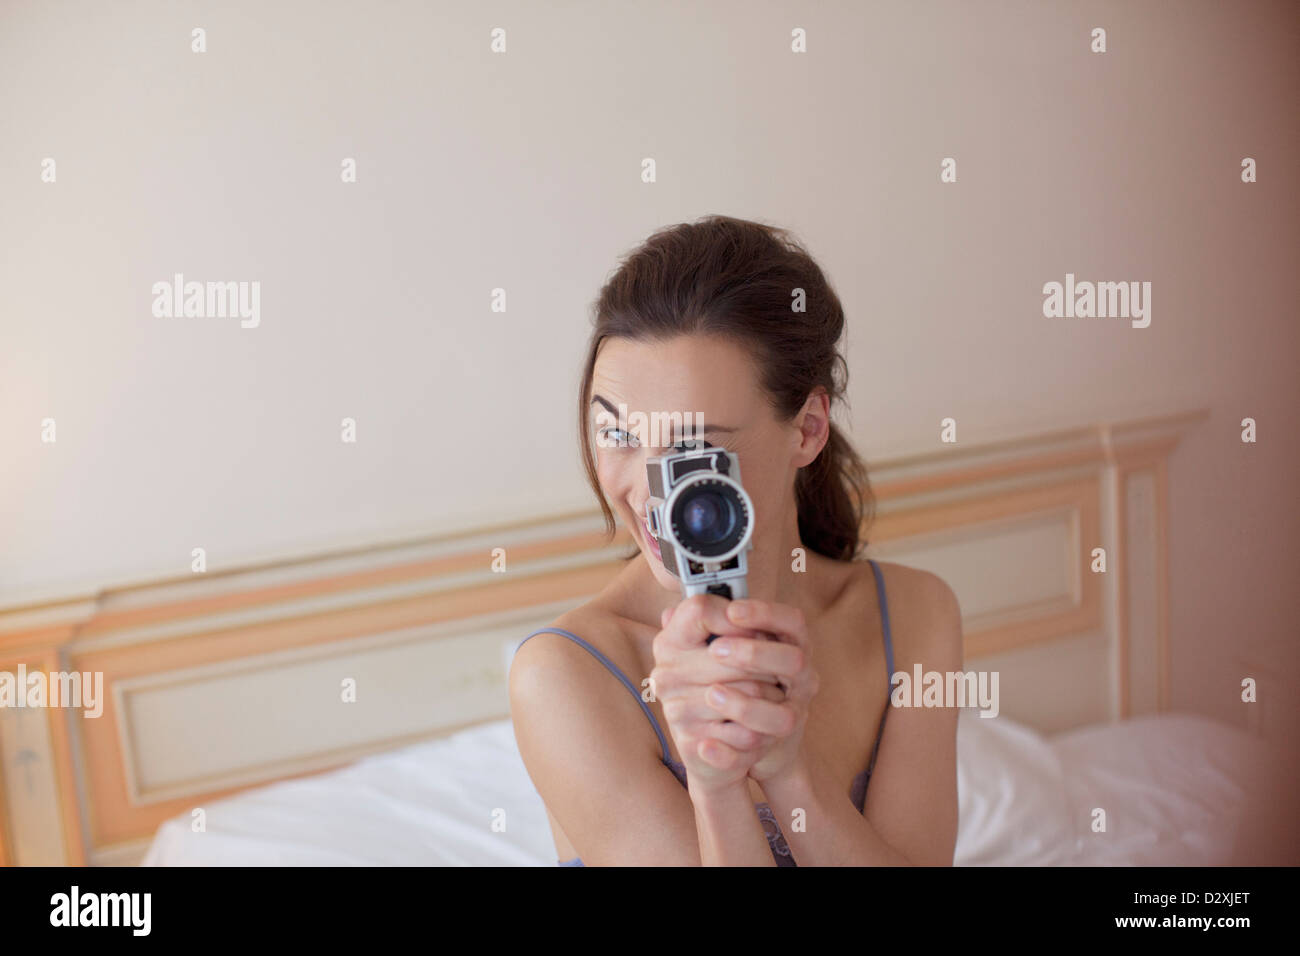 Portrait of woman holding old-fashioned video camera in bed Stock Photo